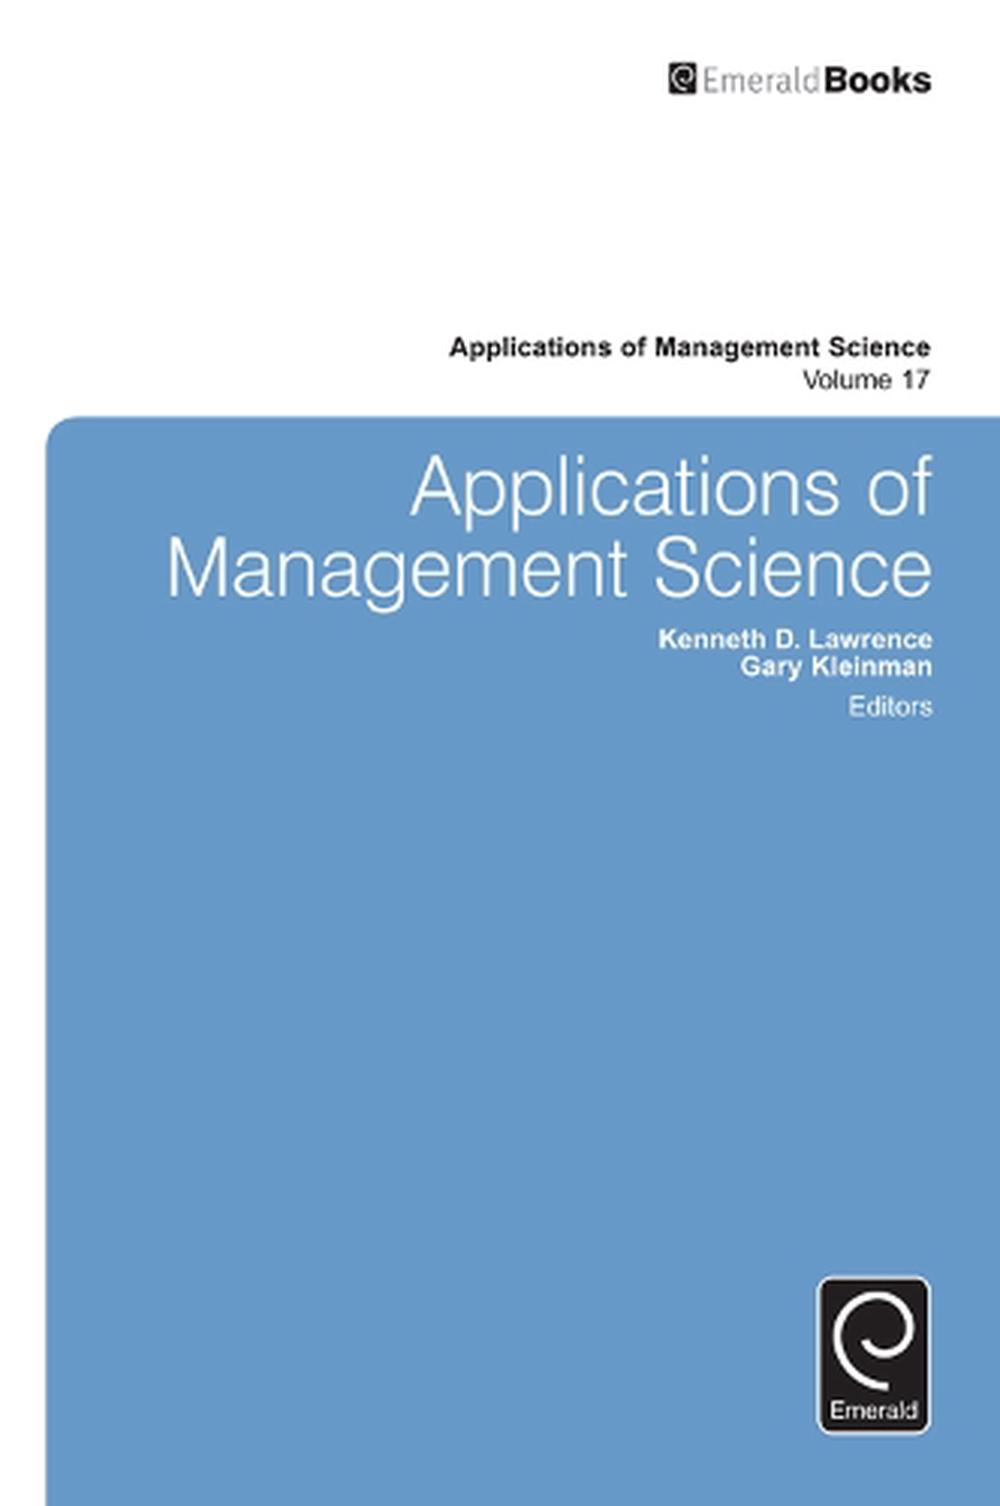 Applications of Management Science by Kenneth Lawrence (English ...